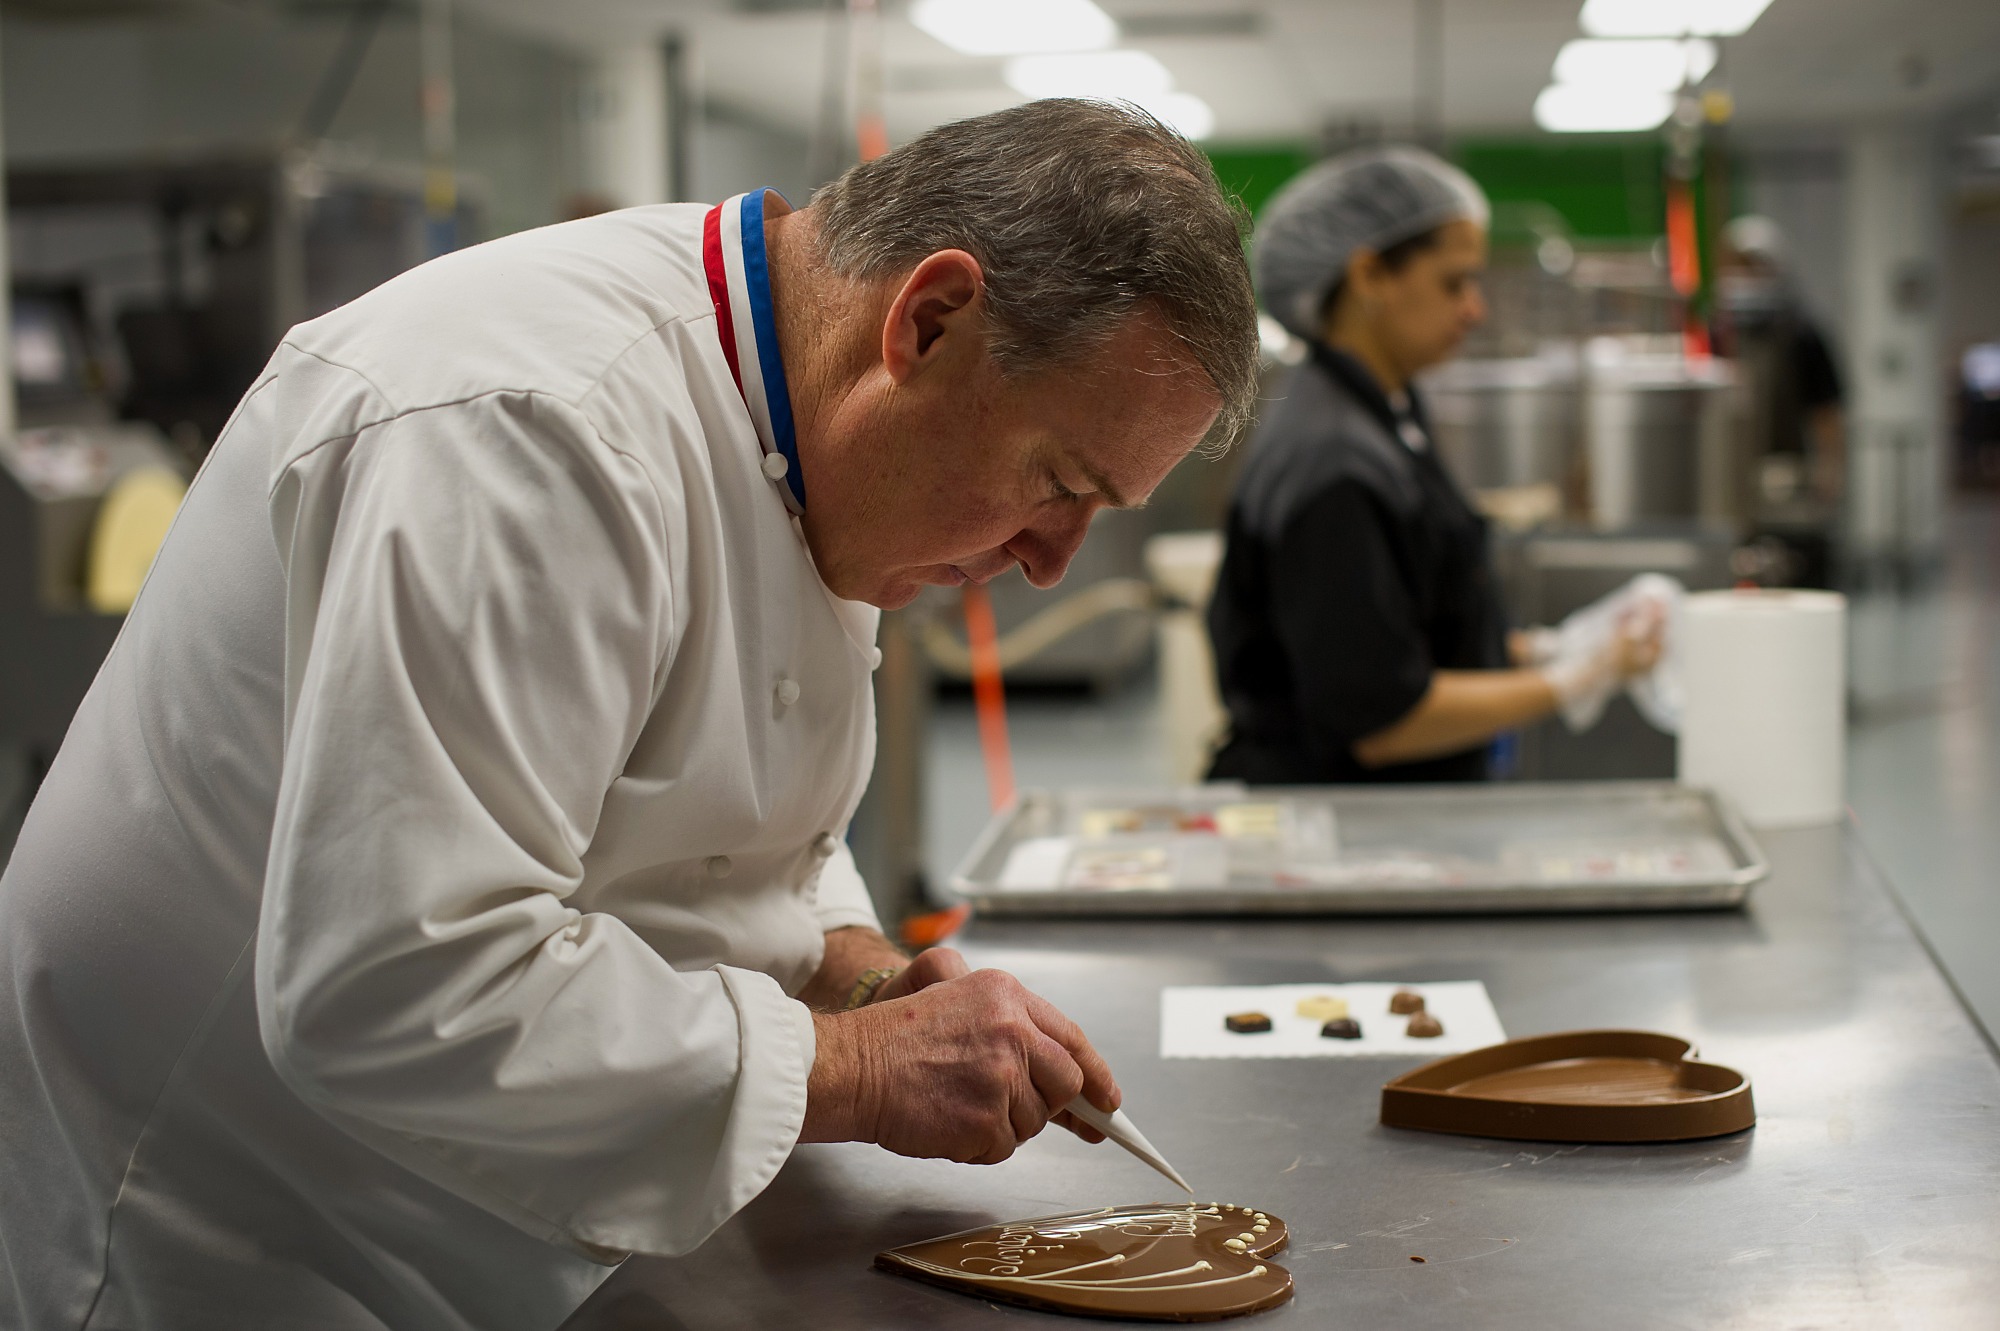 Master pastry chef Jacques Torres makes Valentine's Day chocolates at his factory in the Brooklyn borough of New York, U.S., on Thursday, Feb. 6, 2014.